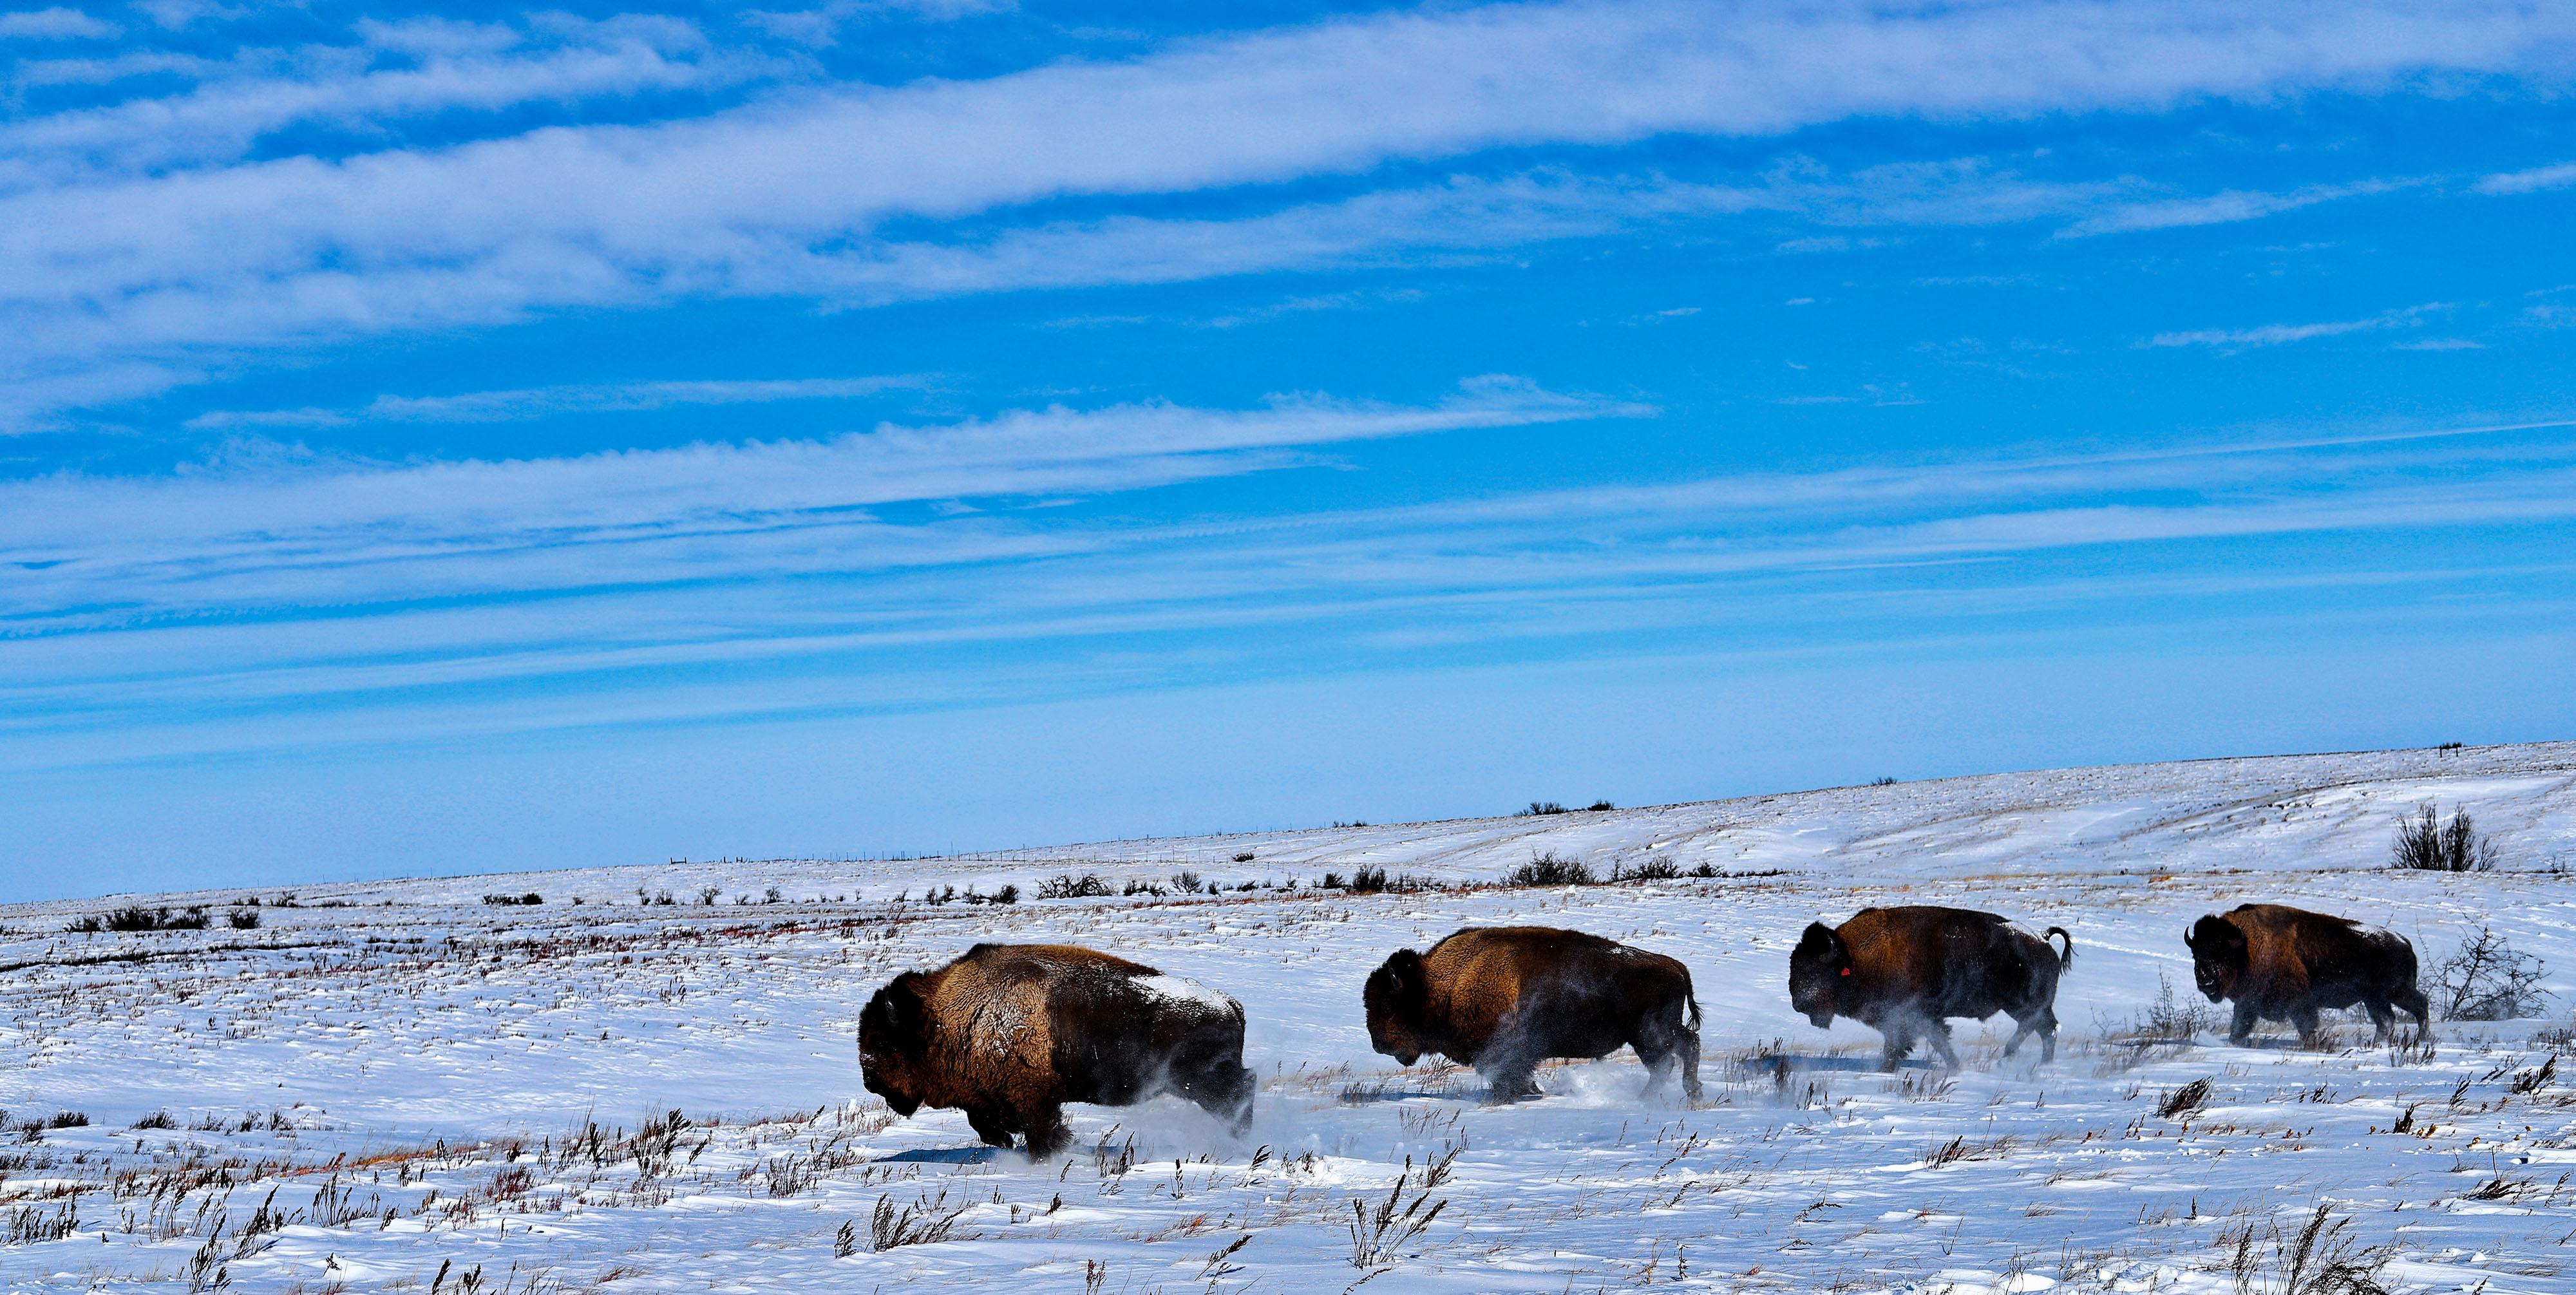 Bison run across the snowy plains on a clear day.